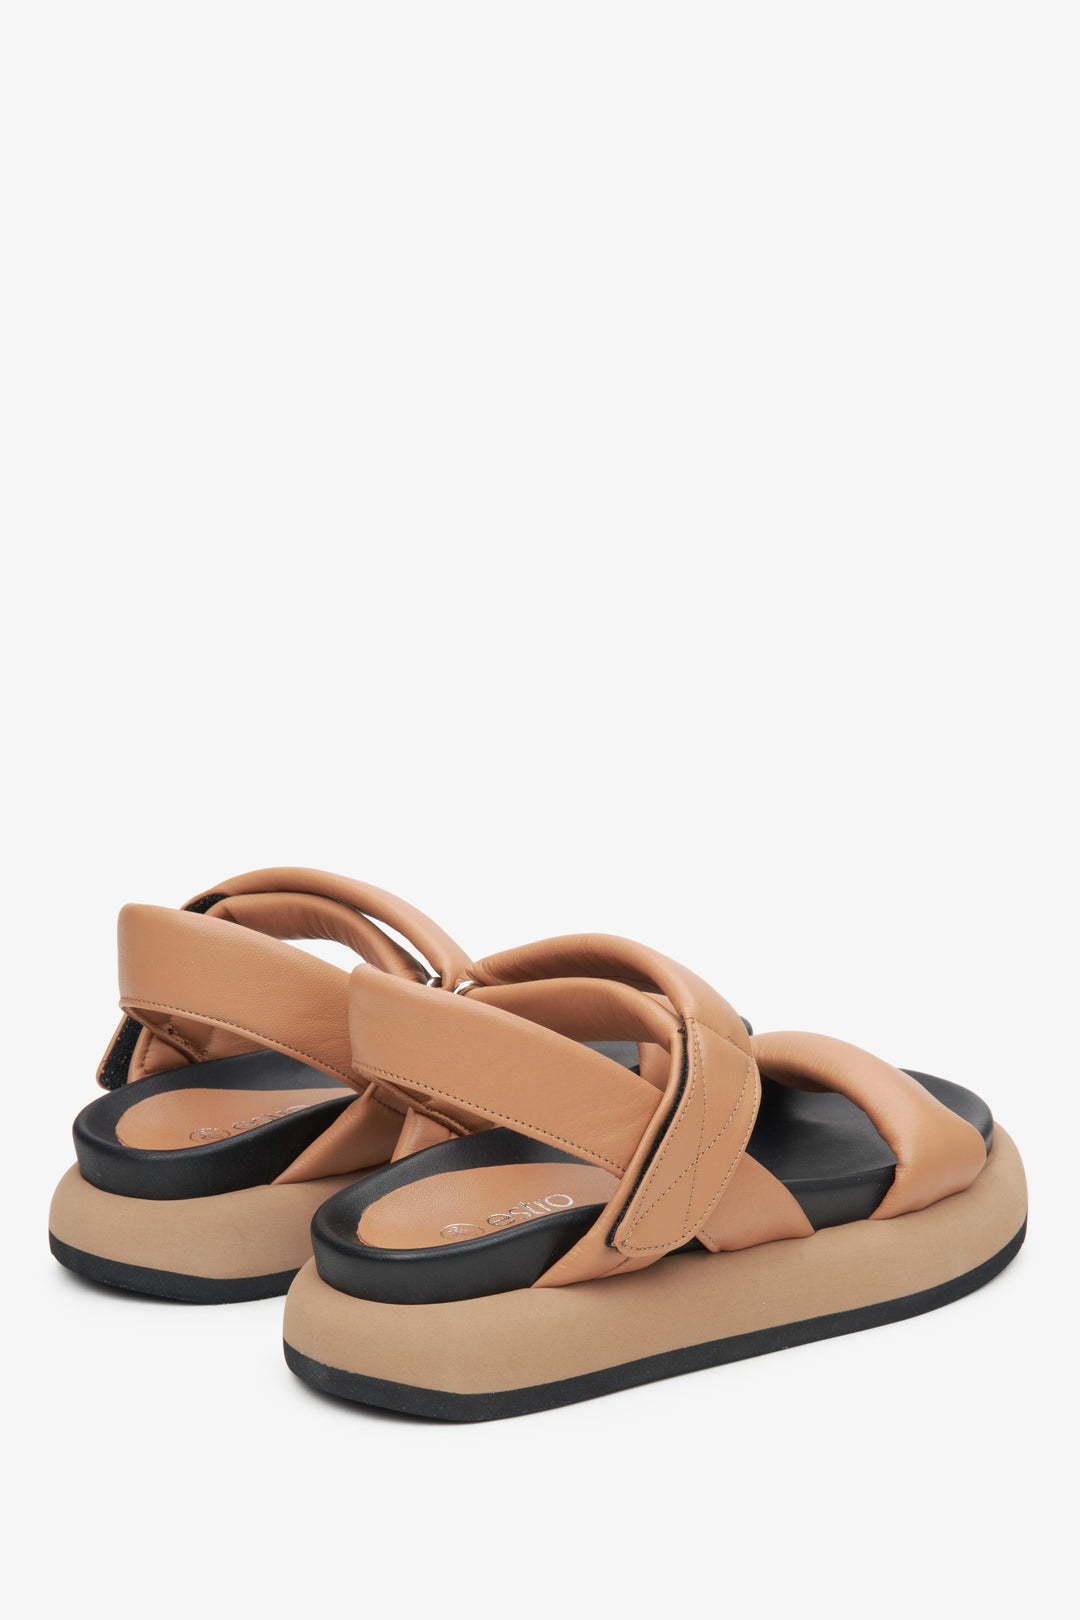 Women's brown leather sandals with soft straps by Estro.